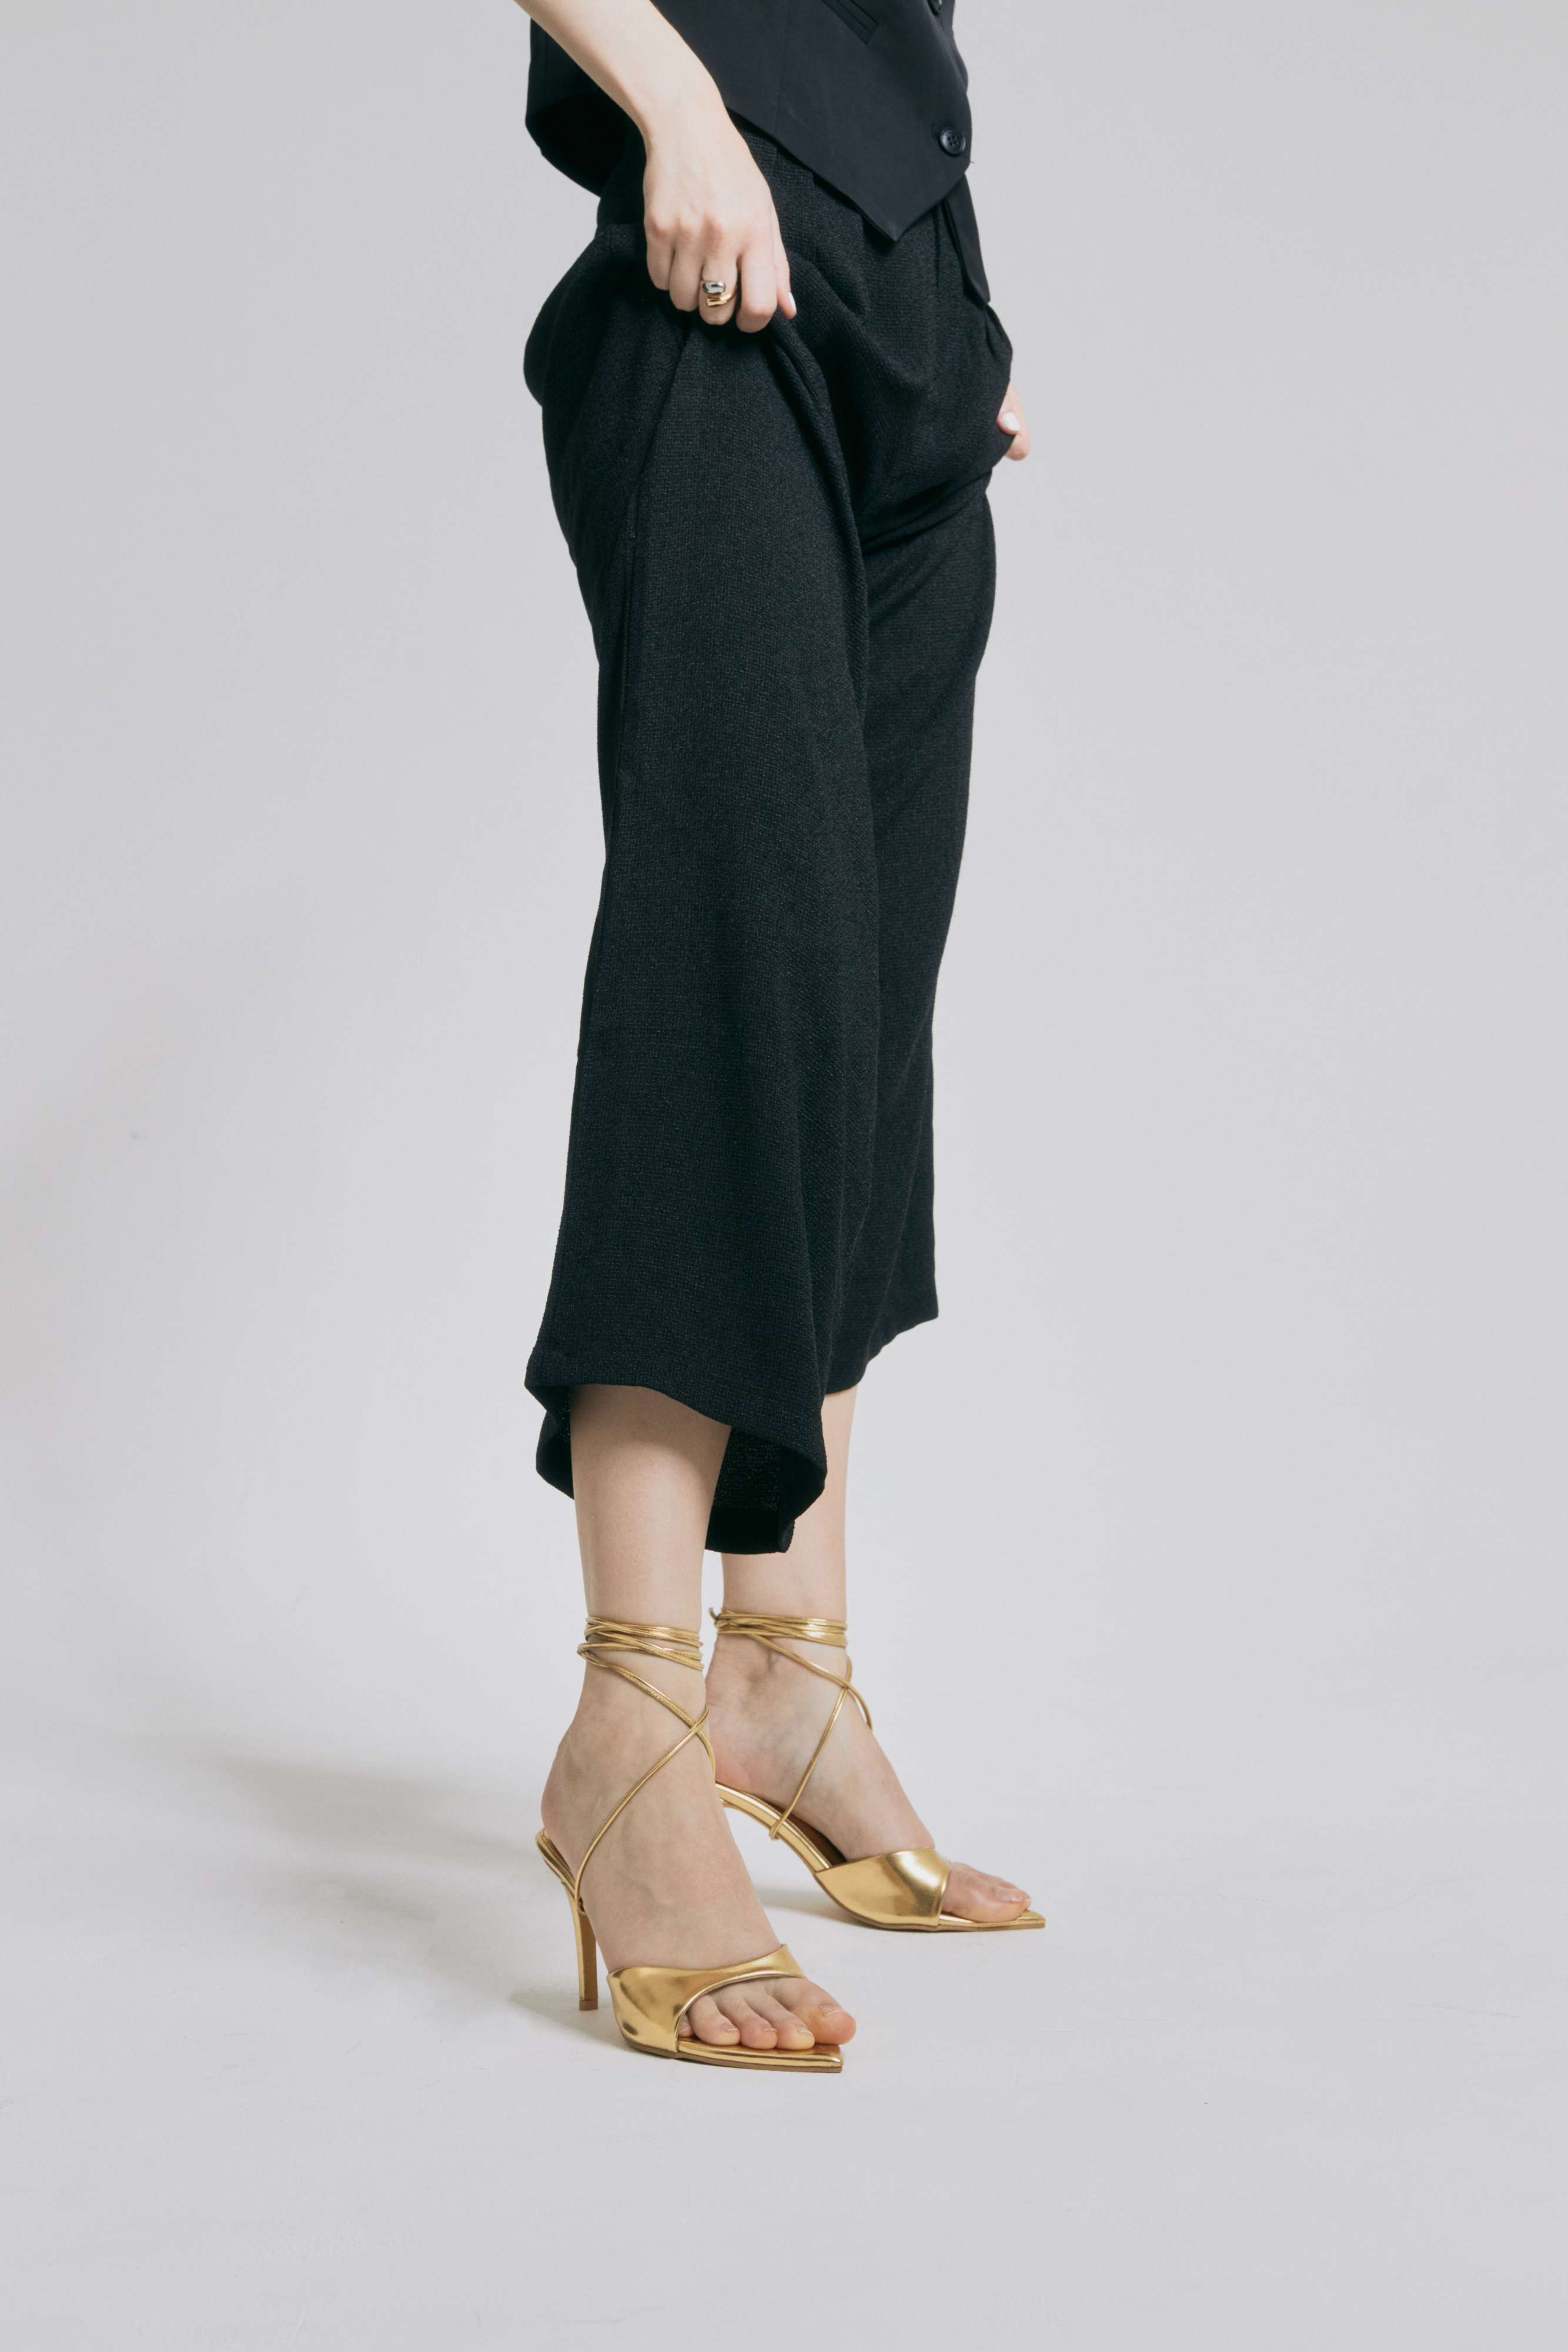 On-Point 2.0 Heels in Gold